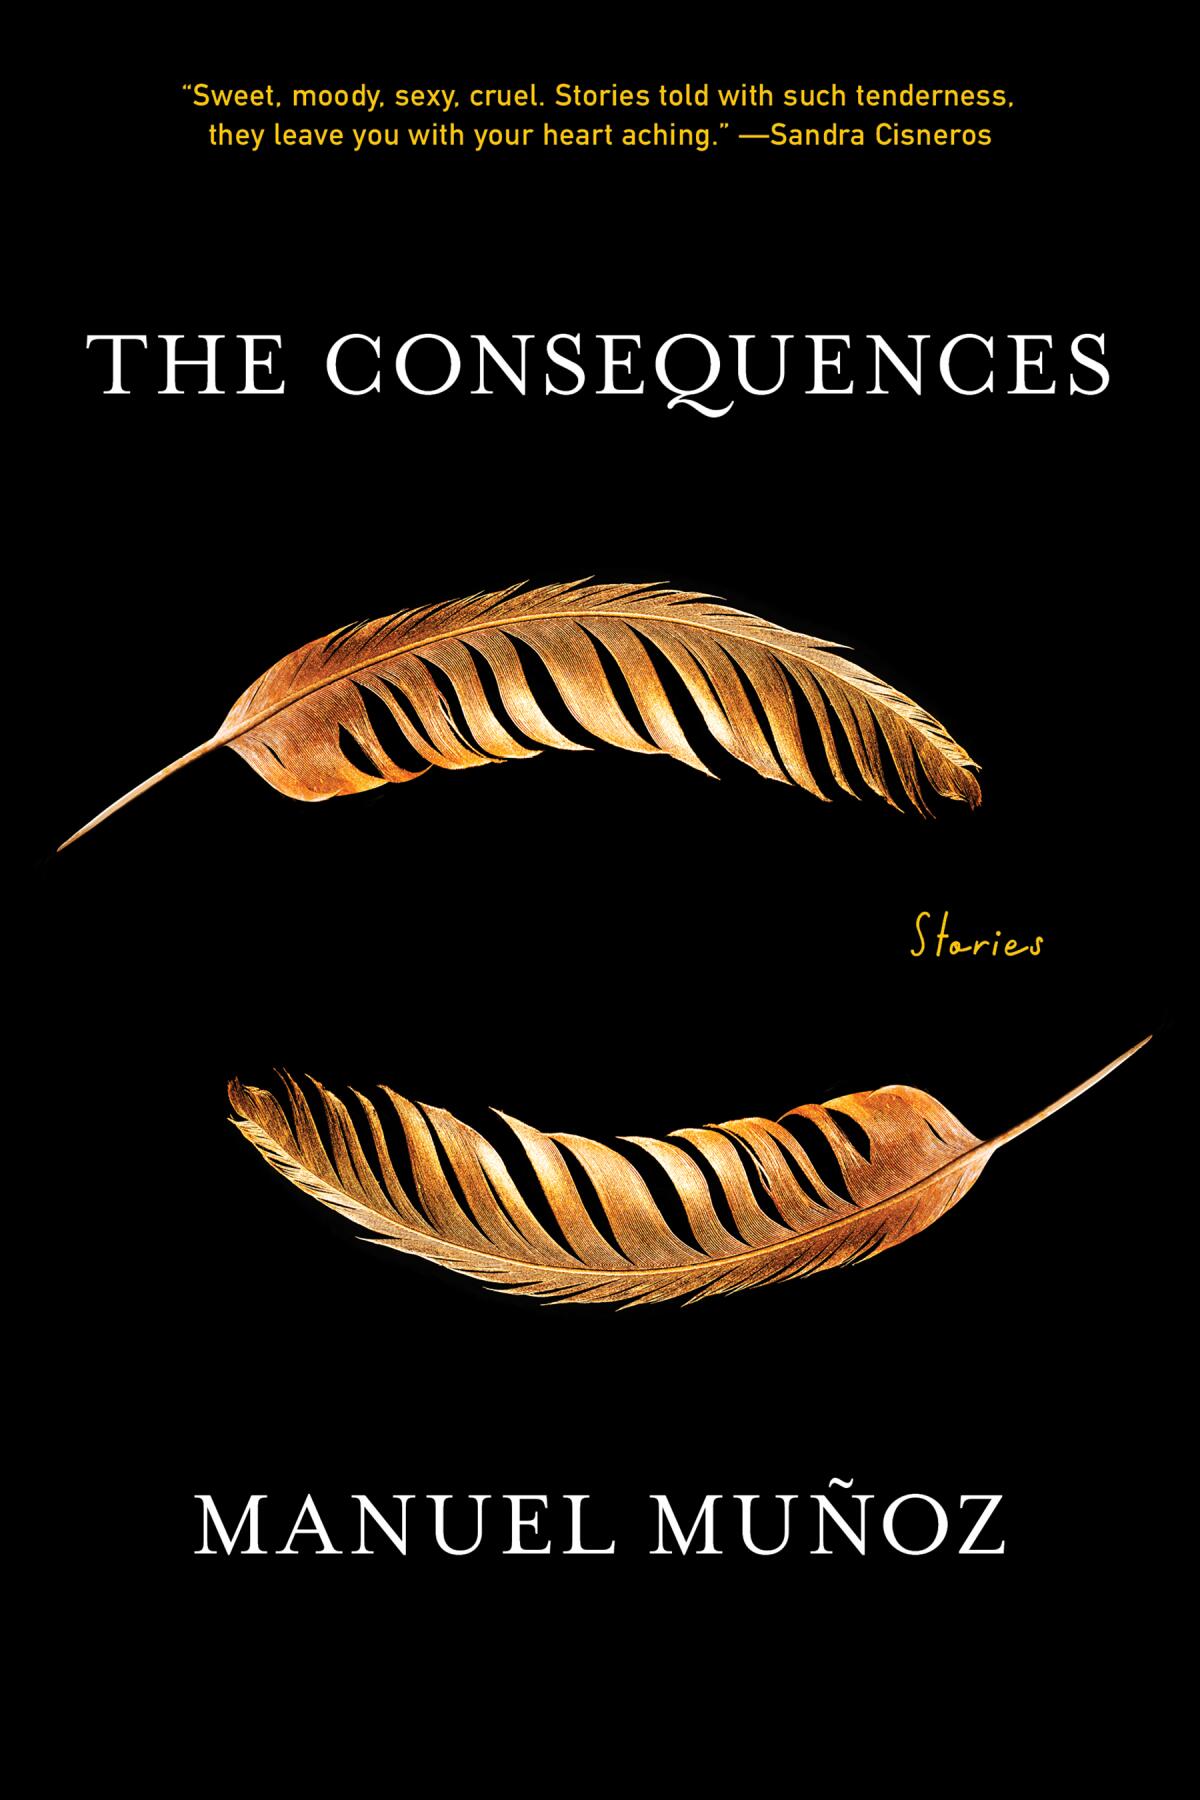 A book cover shows two golden feathers floating one above the other on a solid black background.